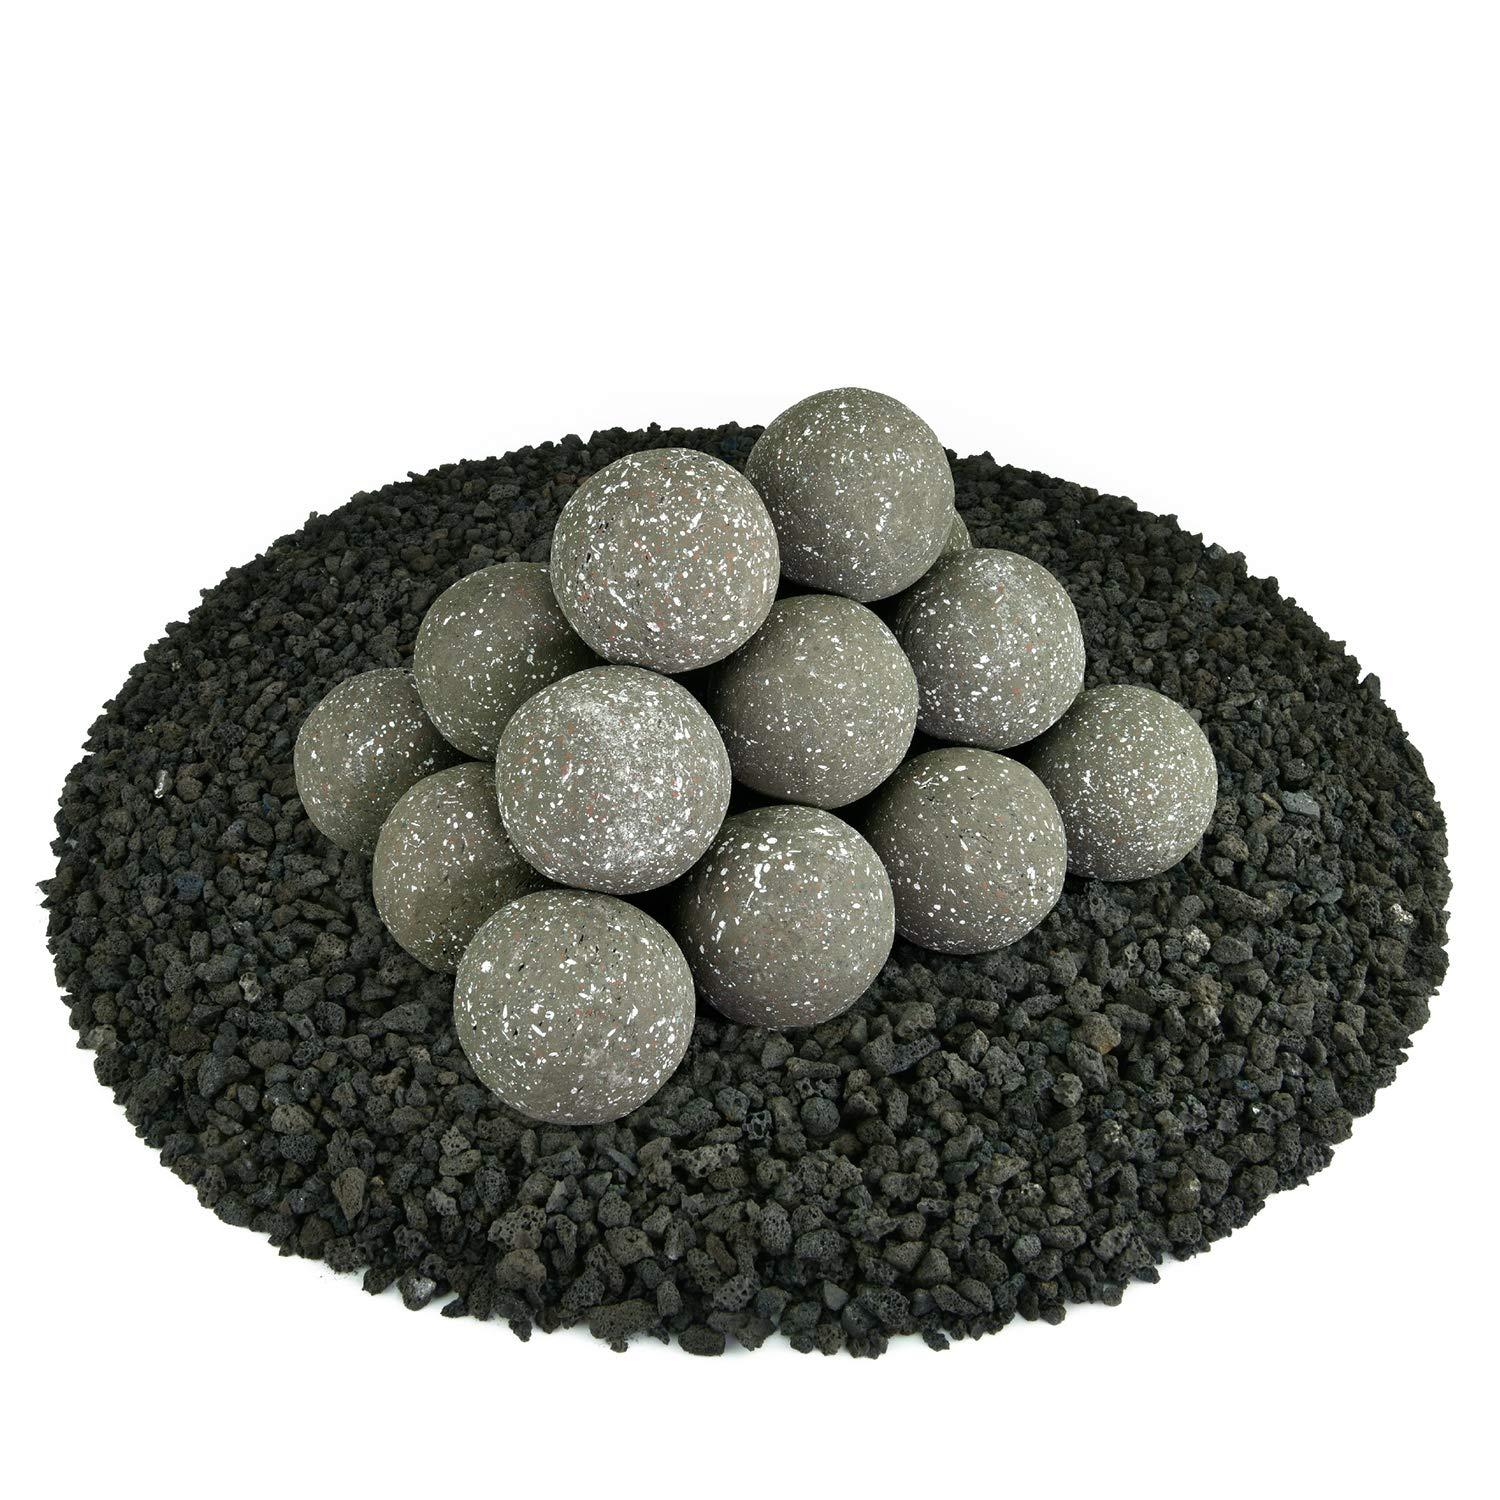 Ceramic Fire Balls Set Of 20 Modern Accessory For Indoor And Outdoor Fire Pits Or Fireplaces - Brushed Concrete Look Charcoal Gray, Speckled, 3 Inch